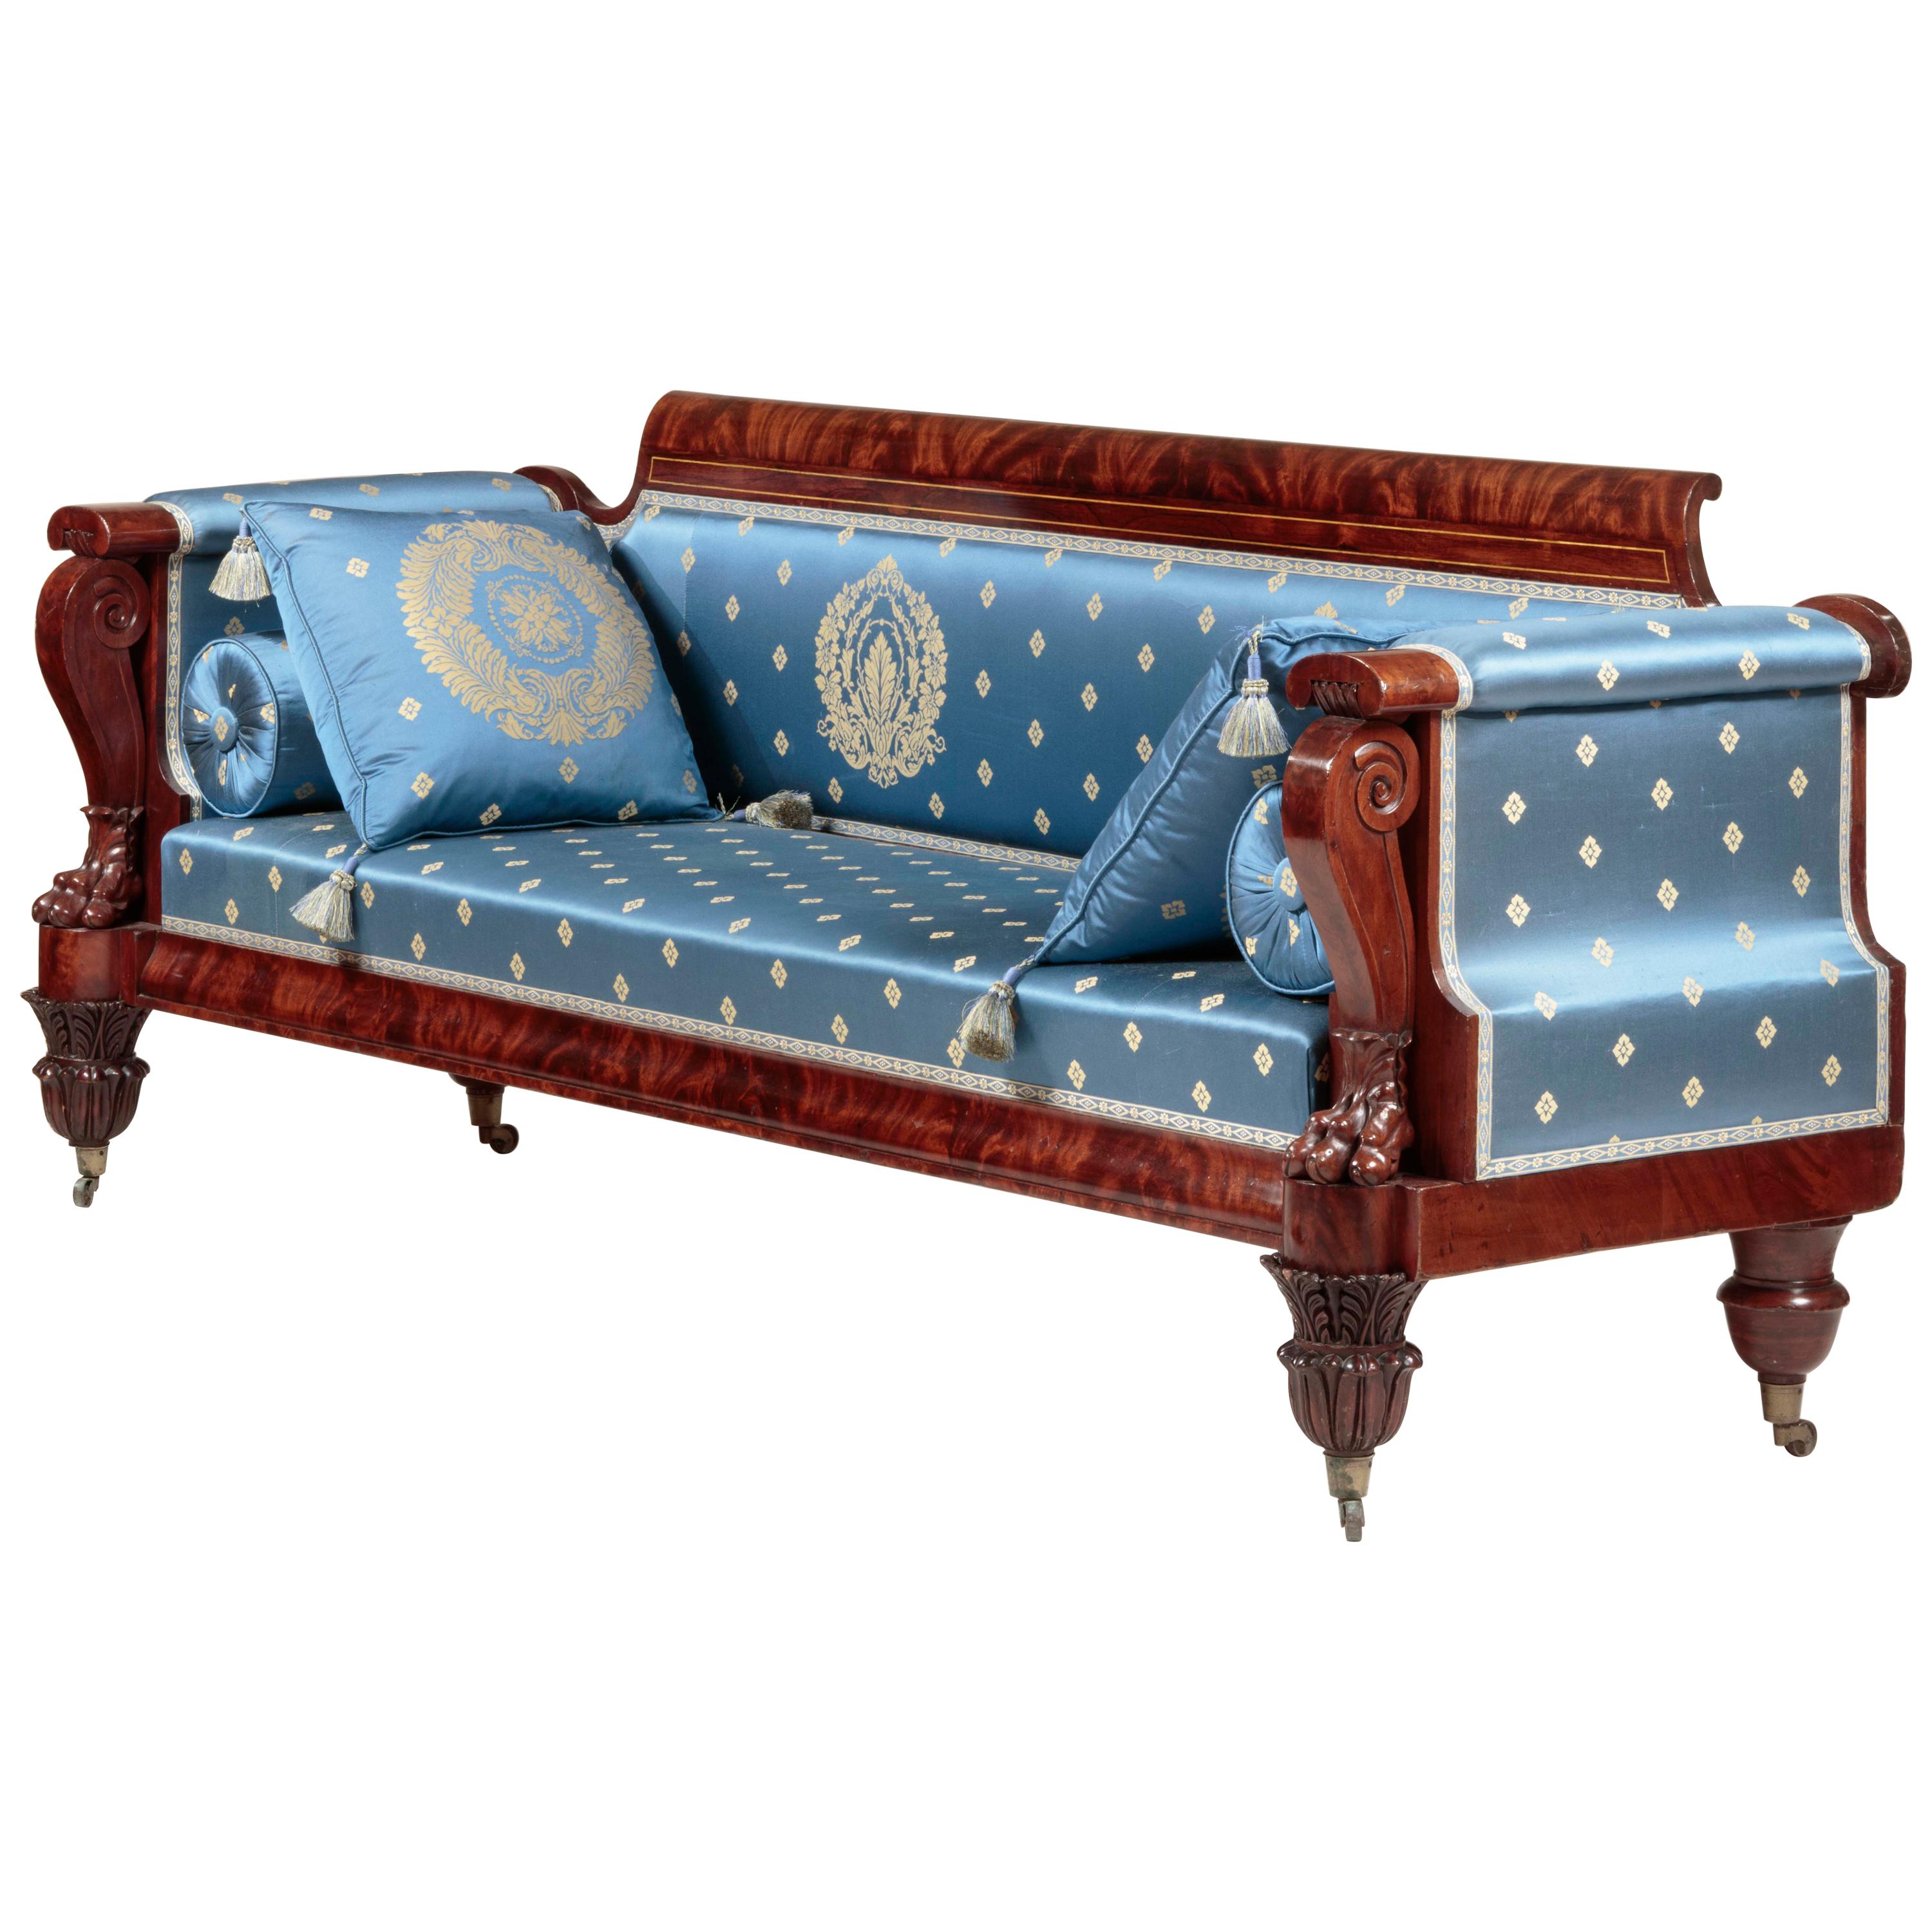 Classical Rosewood-Inlaid Carved-Mahogany Sofa For Sale